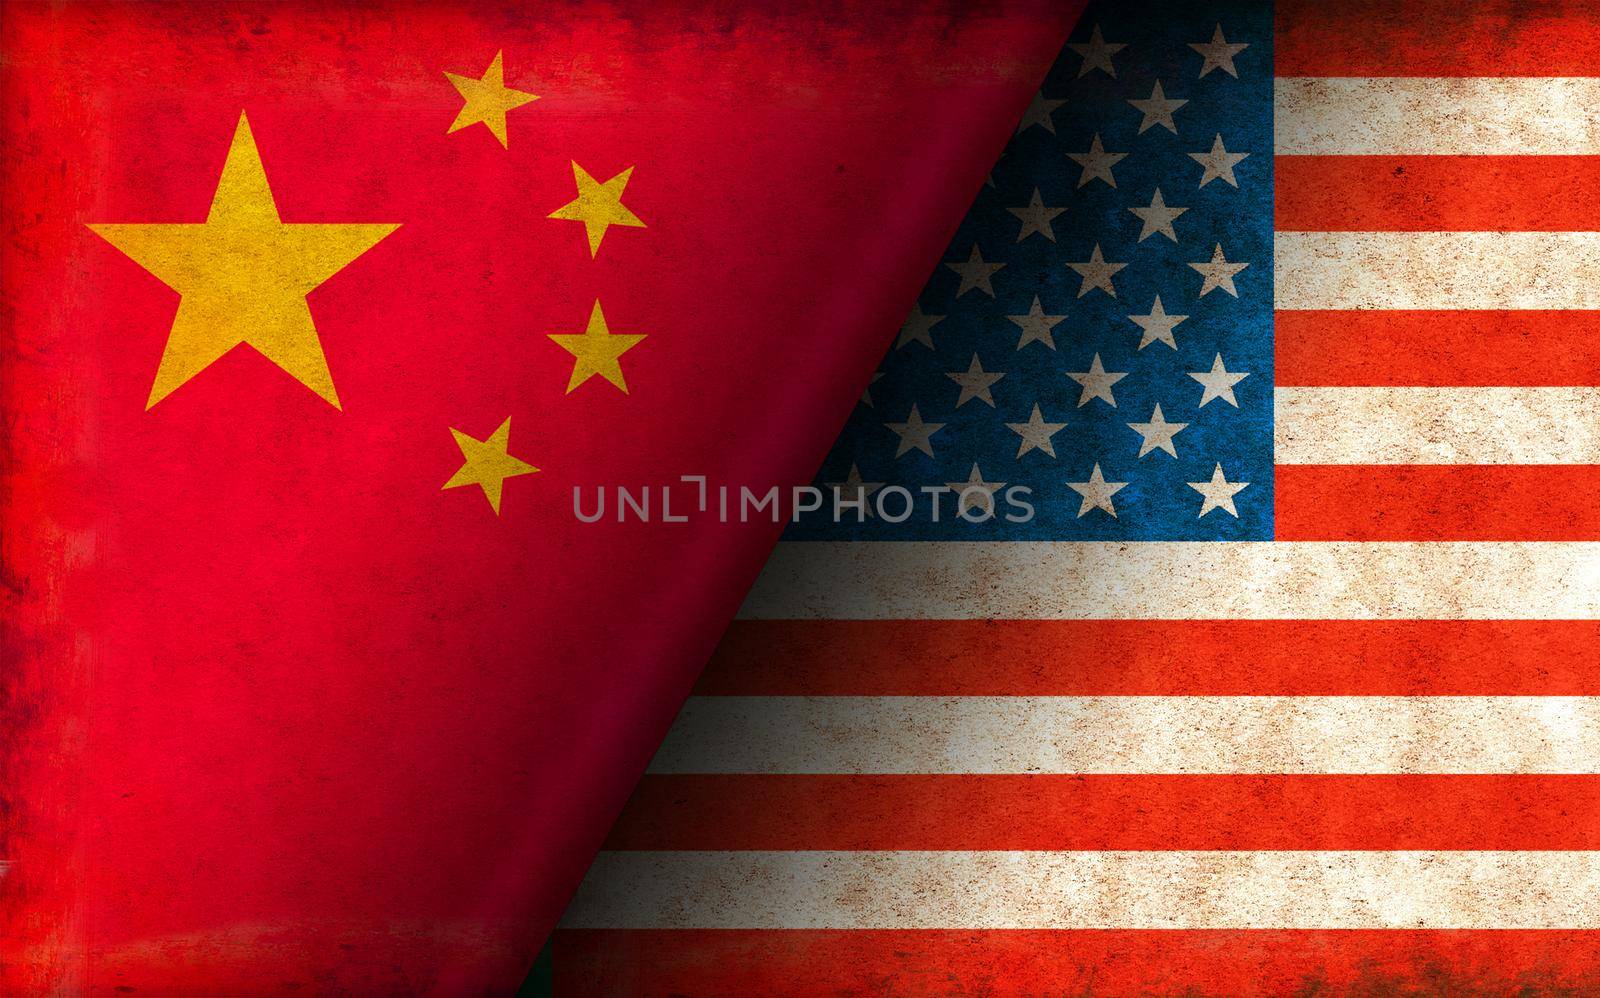 Grunge country flag illustration / China vs USA (Political or economic conflict)